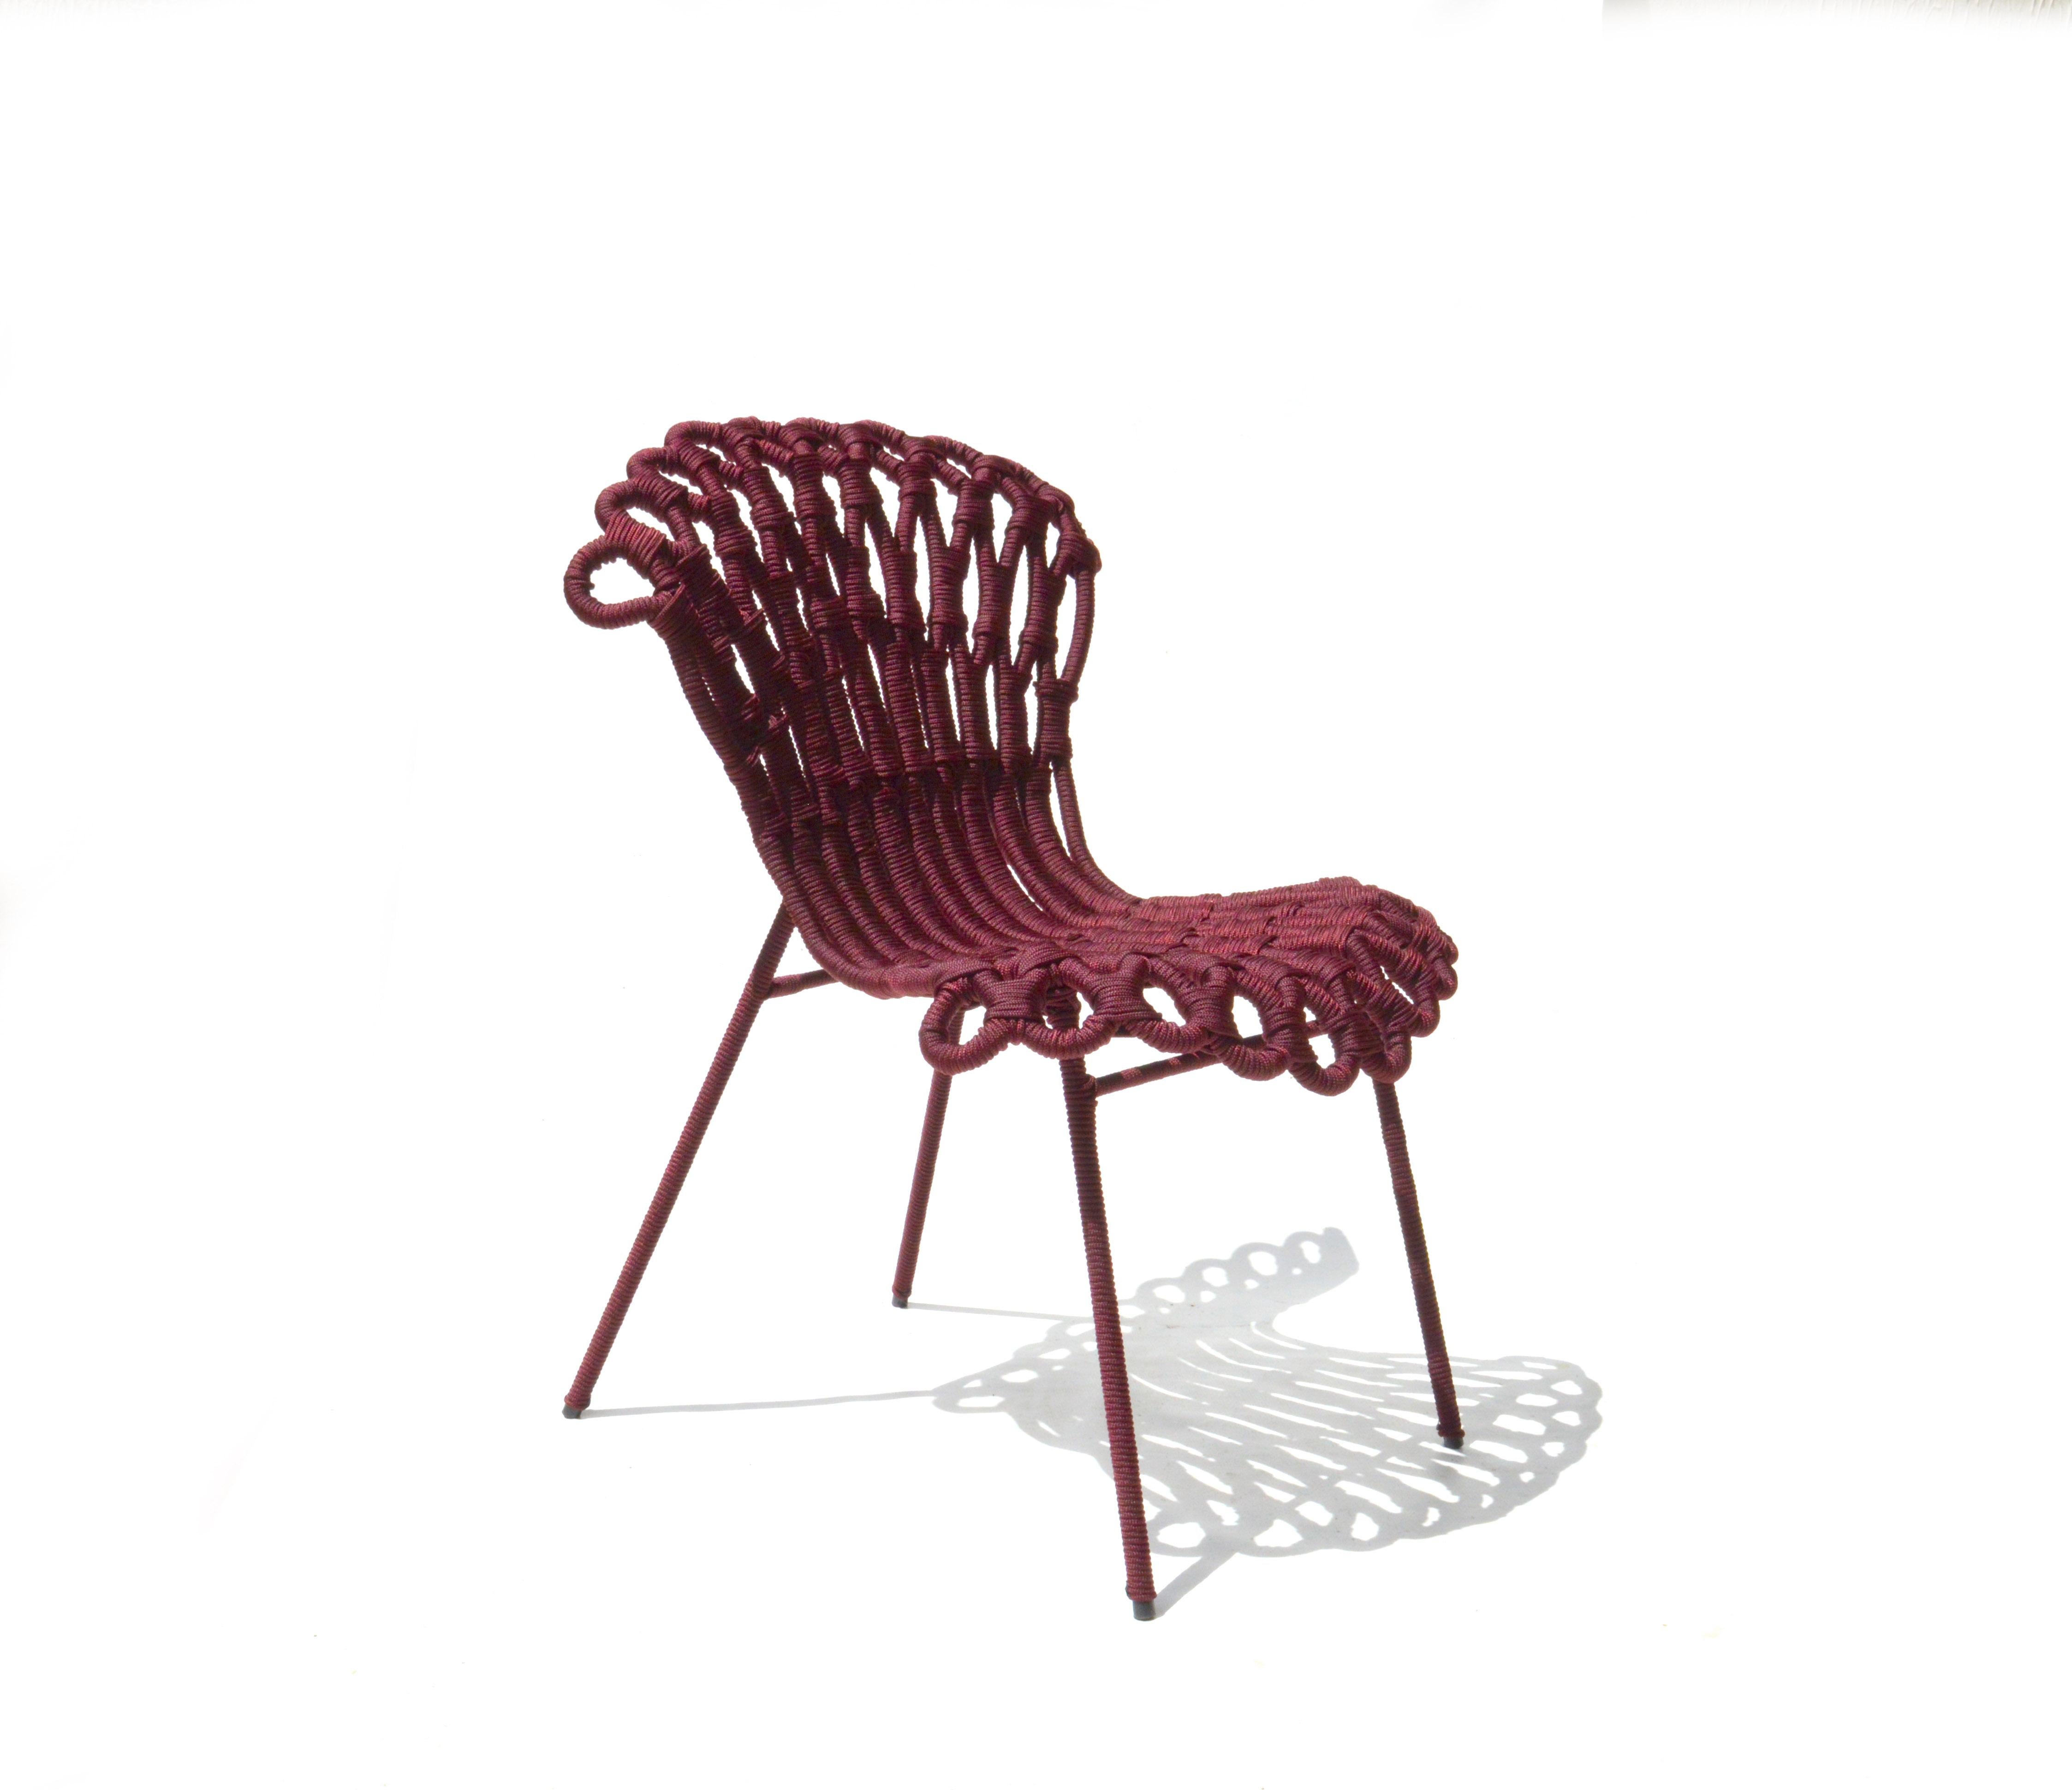 The hypnotic lines shuttle seduces the look. It traces the majestic size of the Buriti chair, with inspiration rooted in the Brazilian flora and the culture of the indigenous and riverside peoples. The design celebrates the buriti tree, imposing